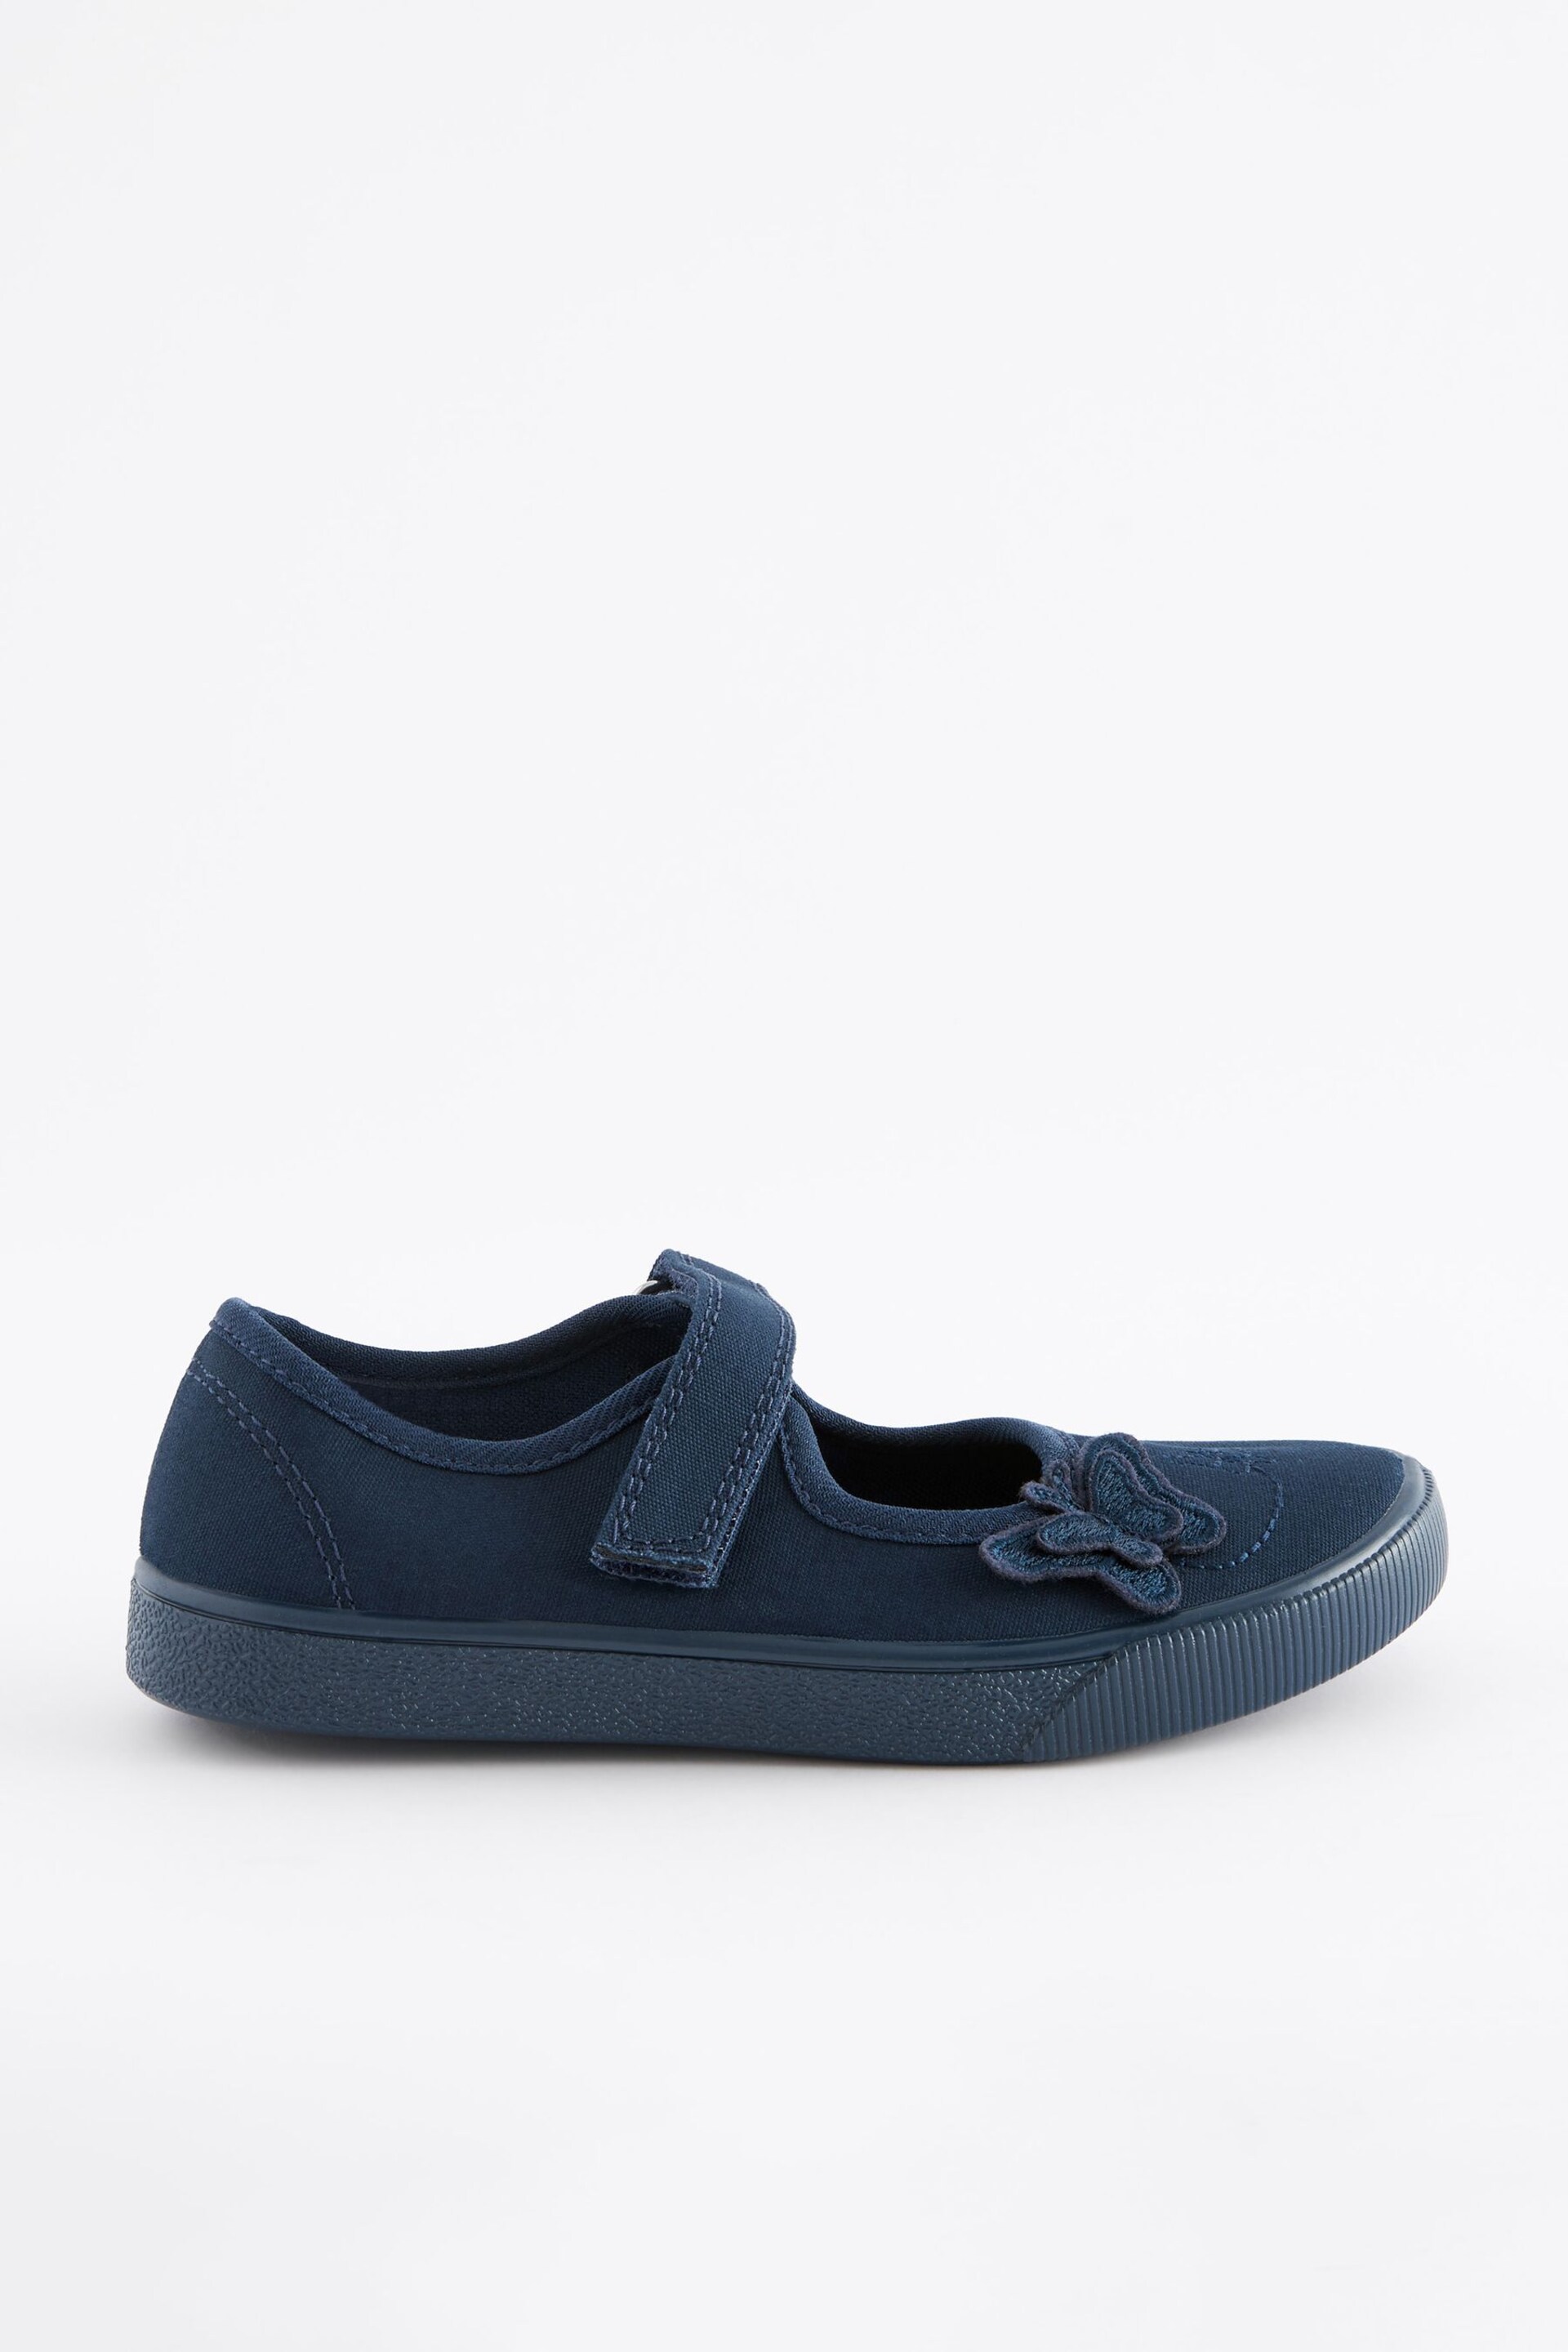 Navy Blue Standard Fit (F) Butterfly Embroidered Plimsolls - Image 2 of 5